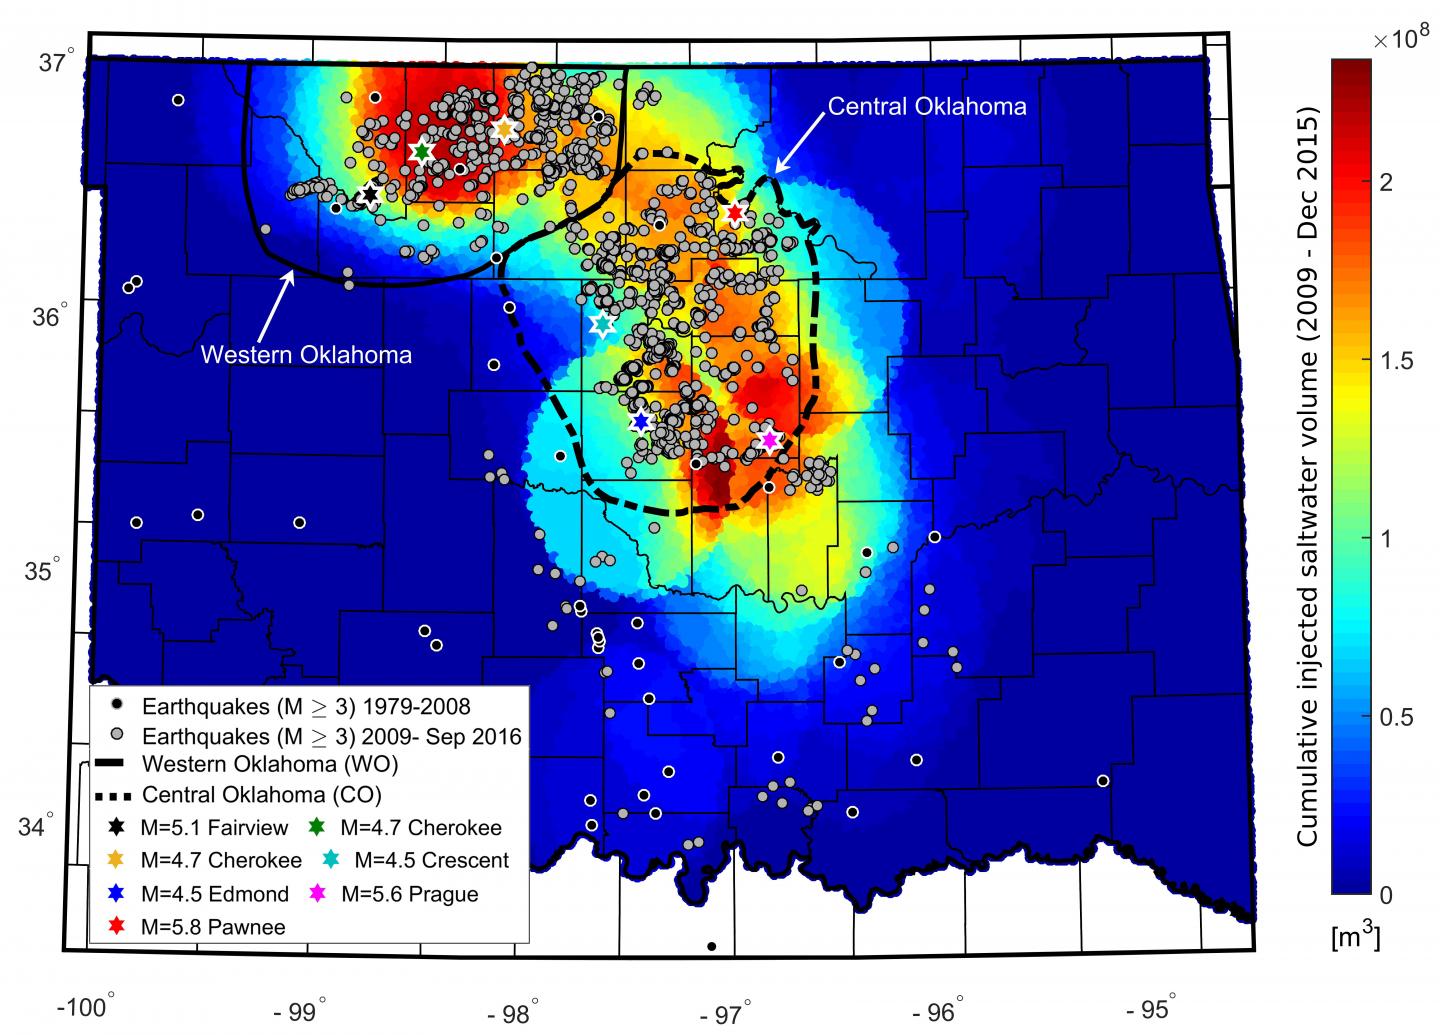 Saltwater Disposal and Earthquakes in Oklahoma